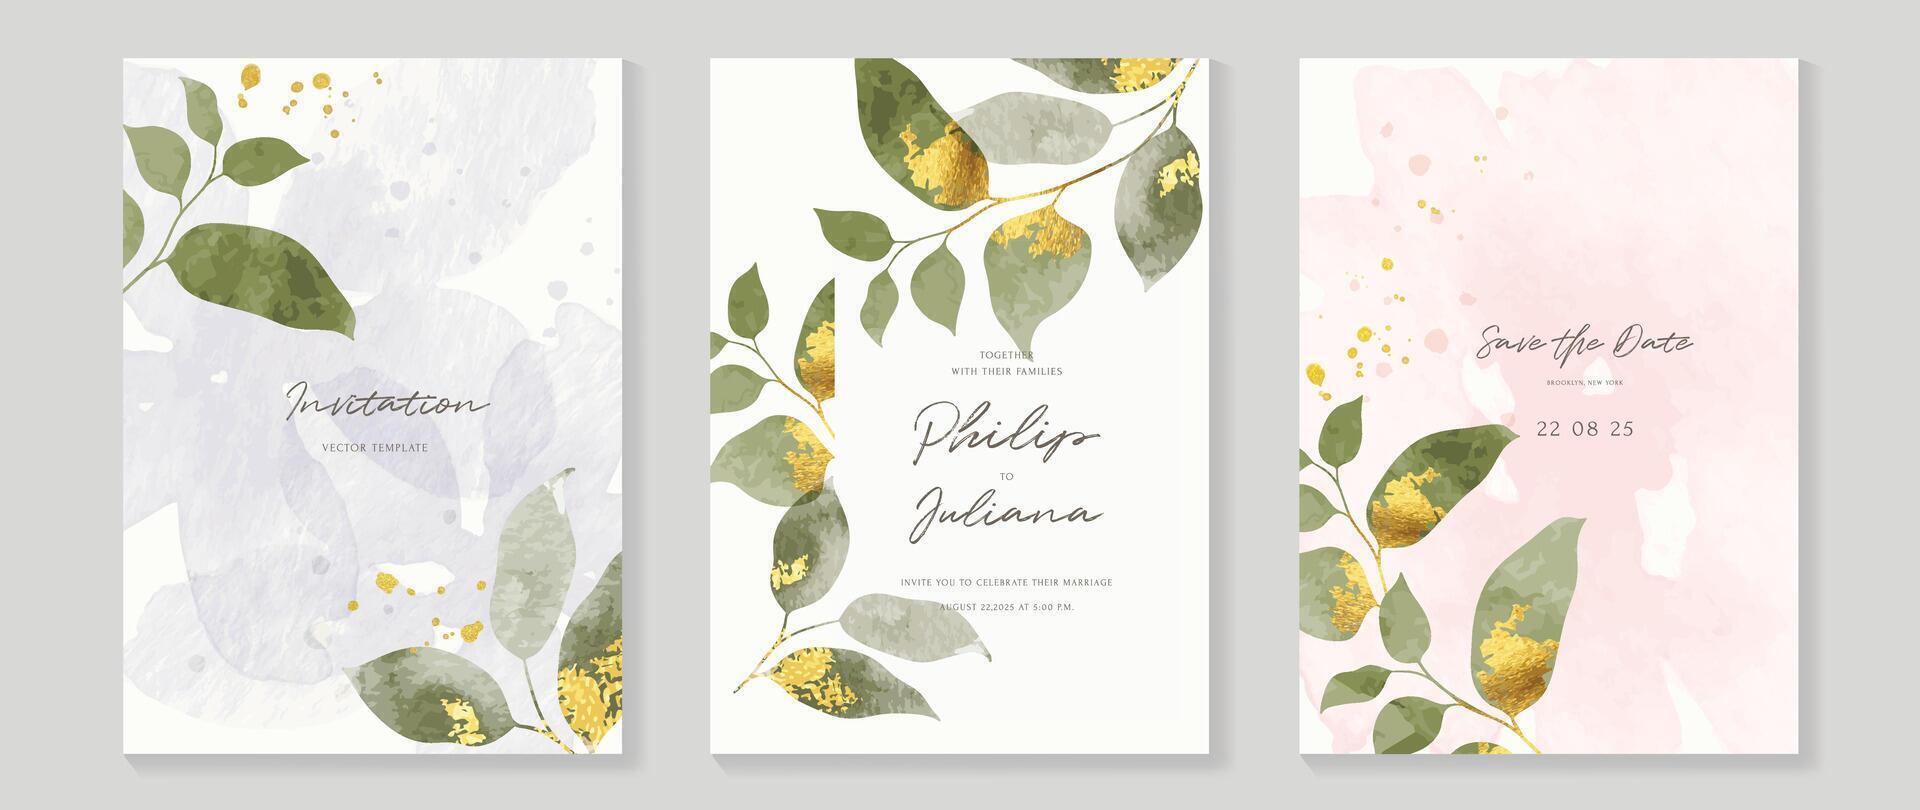 Luxury wedding invitation card template vector. Watercolor card with foliage, leaves branch gold texture on white background. Elegant spring botanical design suitable for banner, cover, invitation. vector